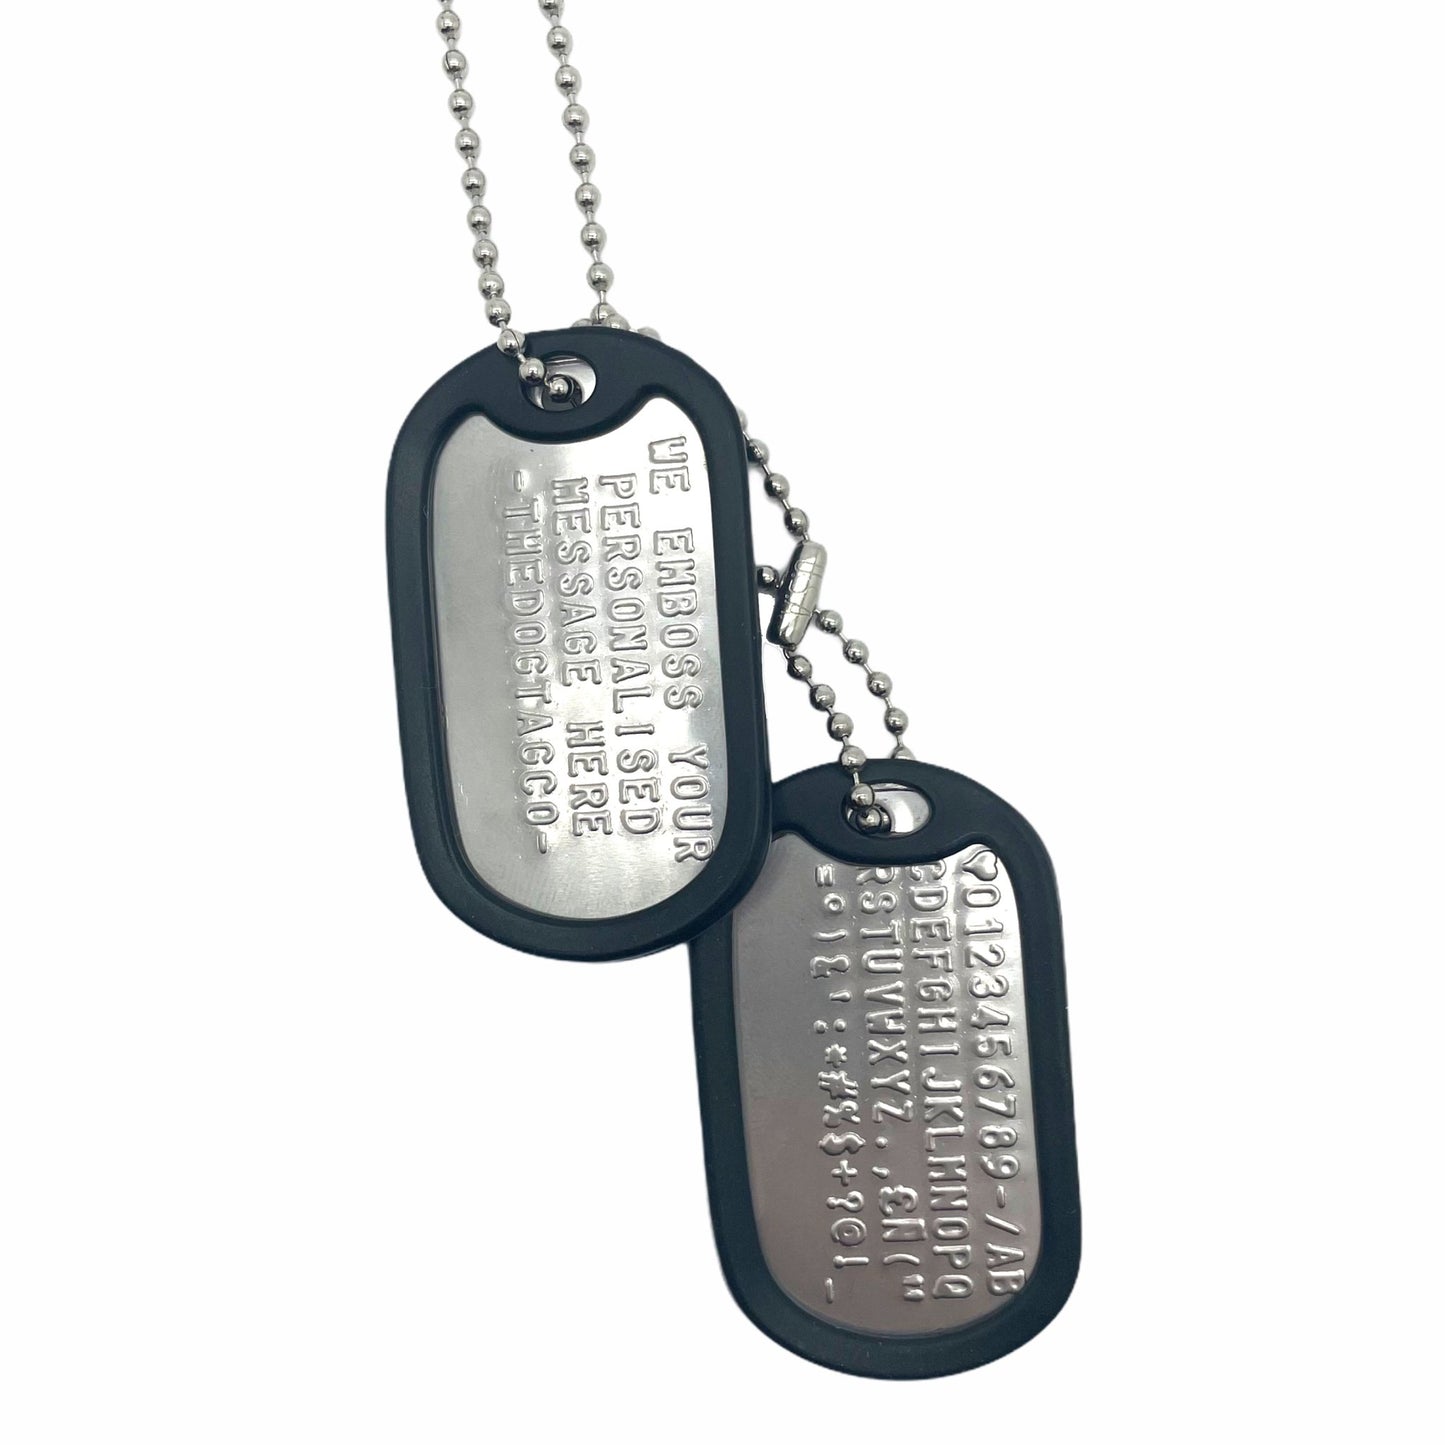 Authentic Personalised US Military Embossed Stainless Steel Dog Tags Pair Set - 1975 To Present Day - TheDogTagCo